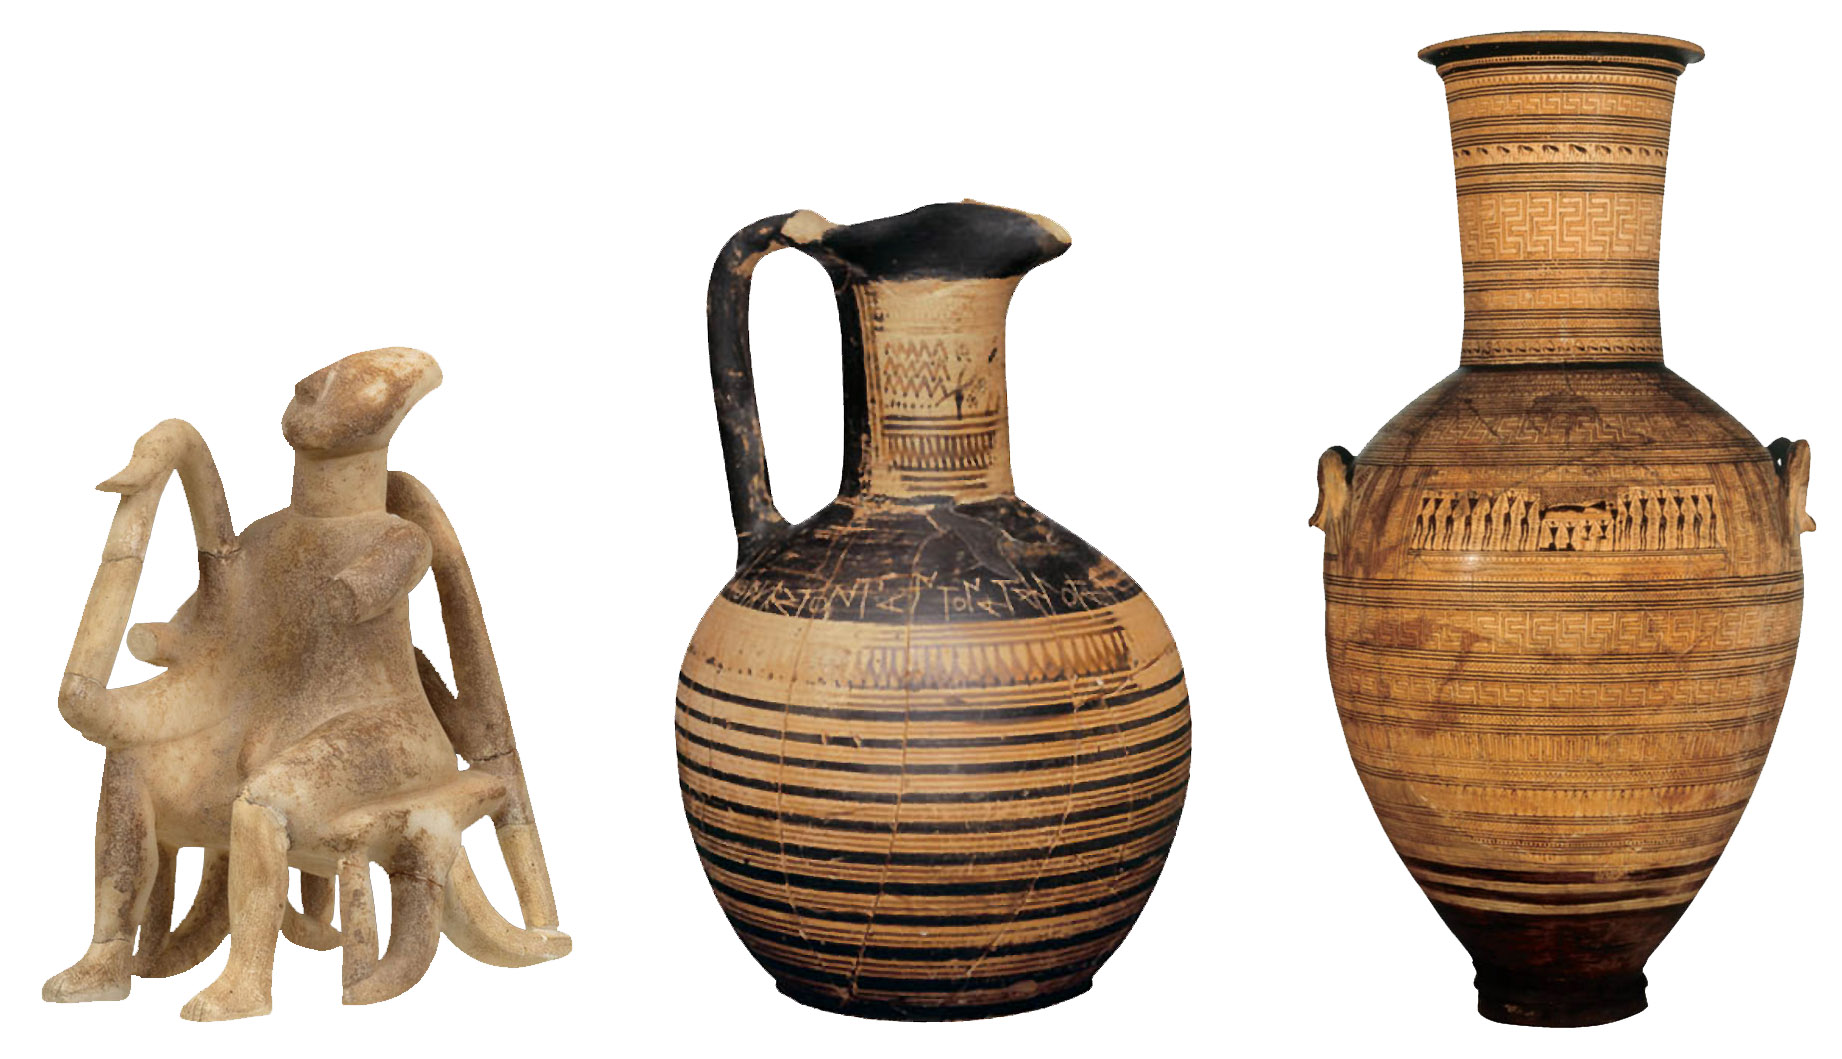 objects from Palaiologos